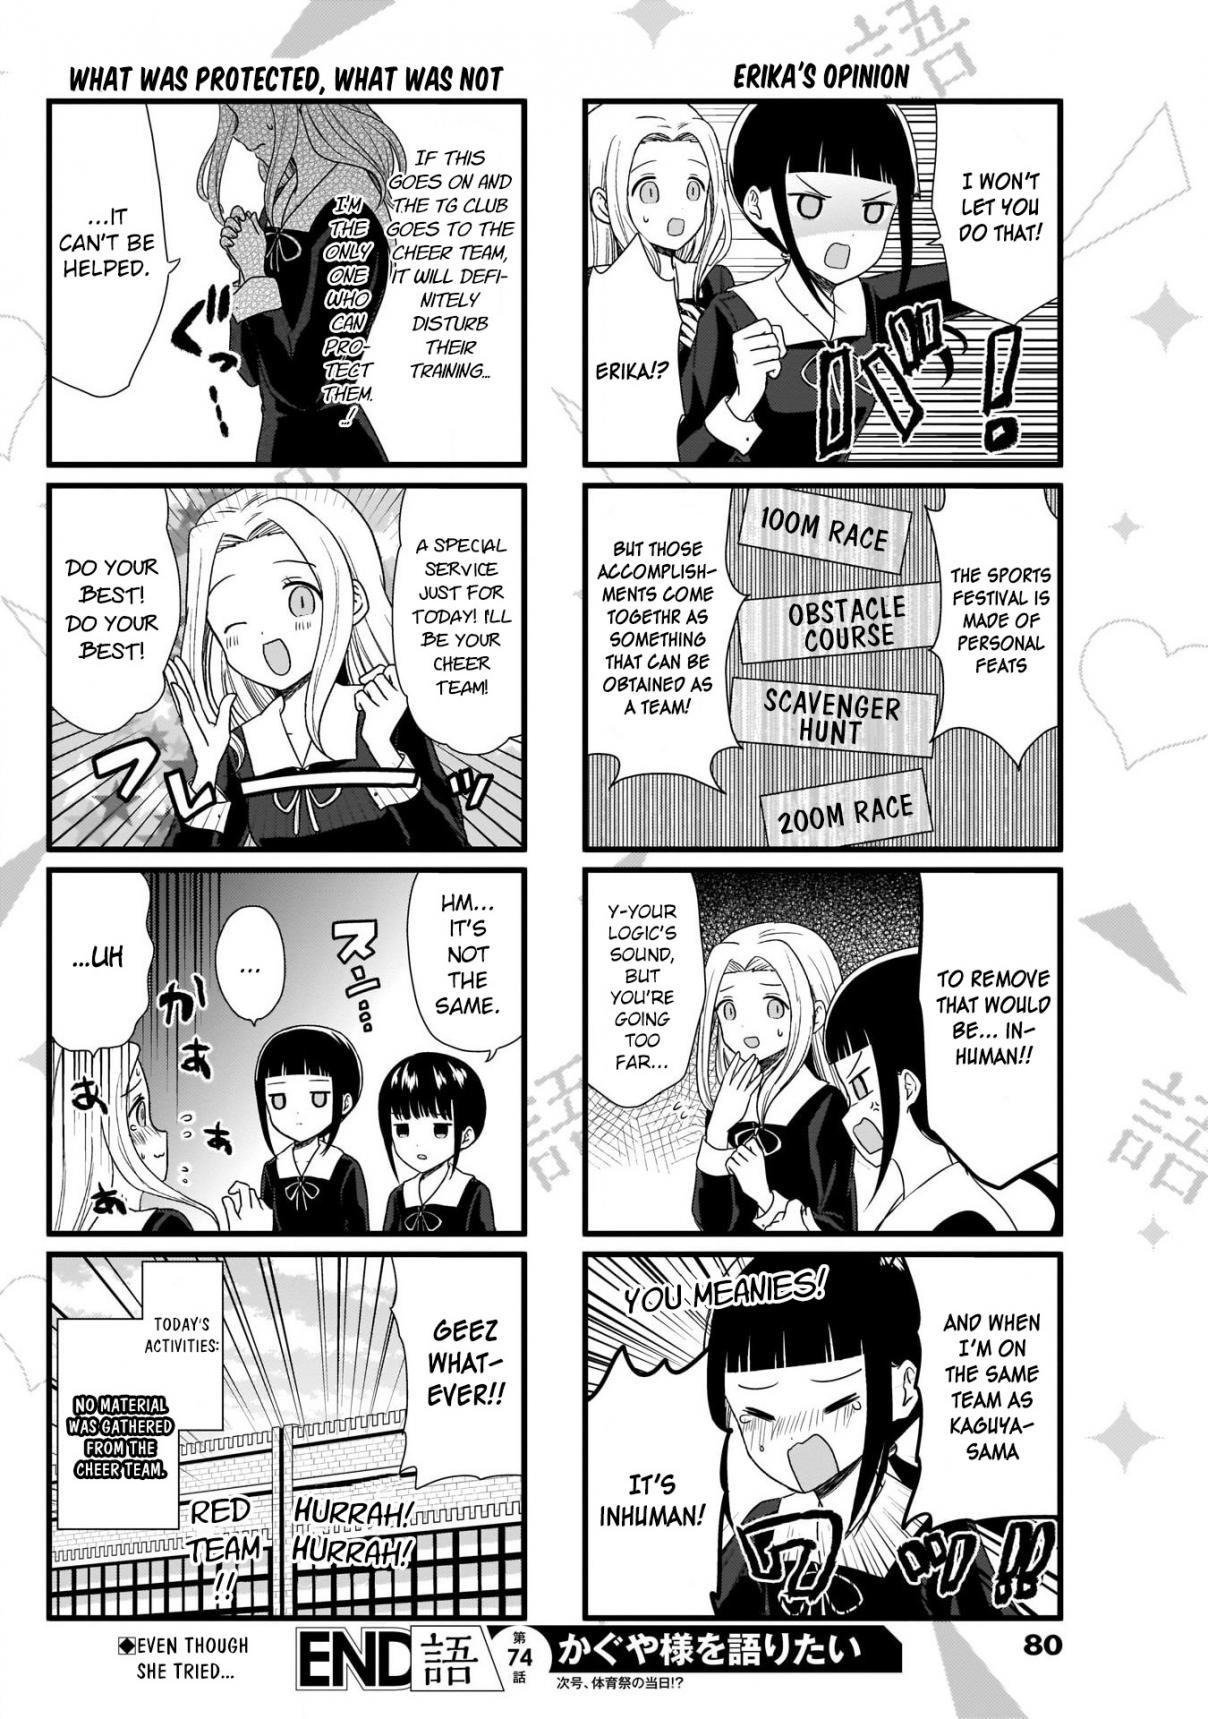 We Want To Talk About Kaguya Ch. 74 We can't talk to the cheer team